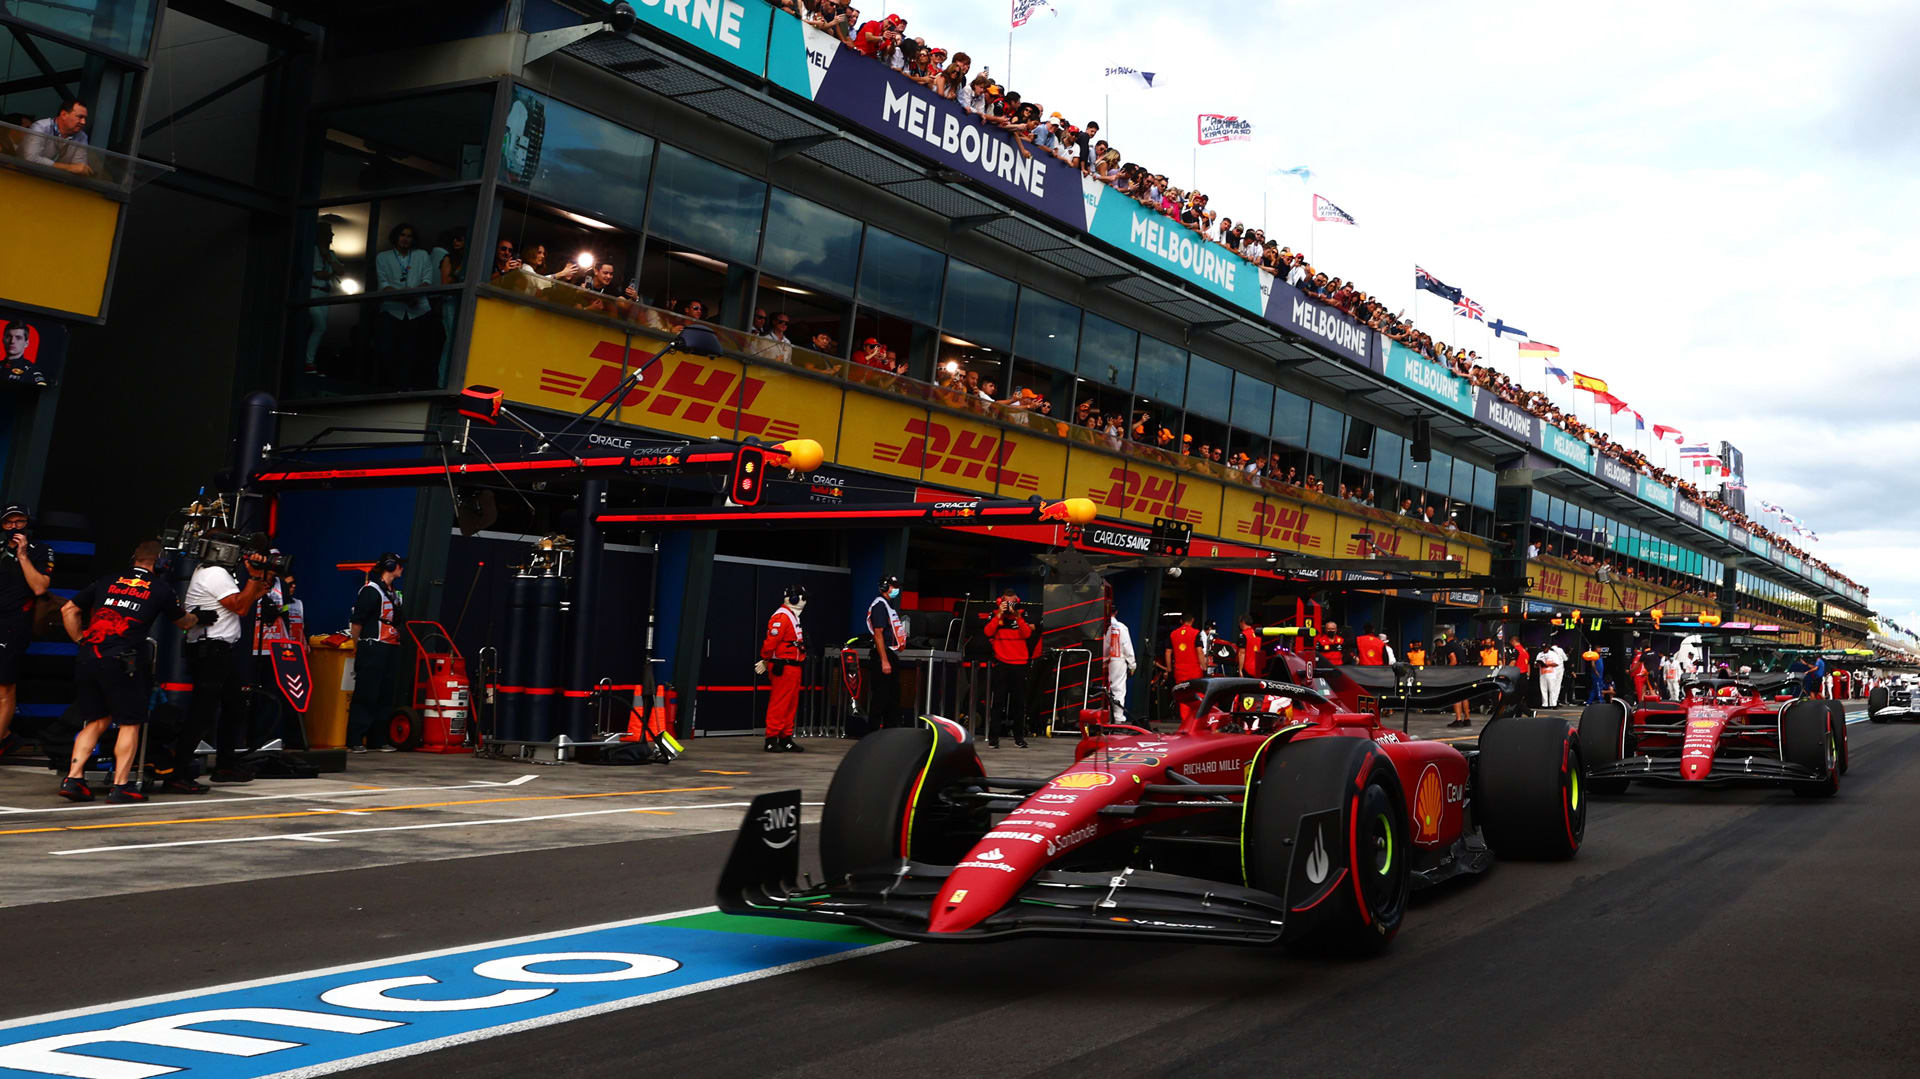 STRATEGY GUIDE What are the possible race strategies for the 2022 Australian Grand Prix? Formula 1®